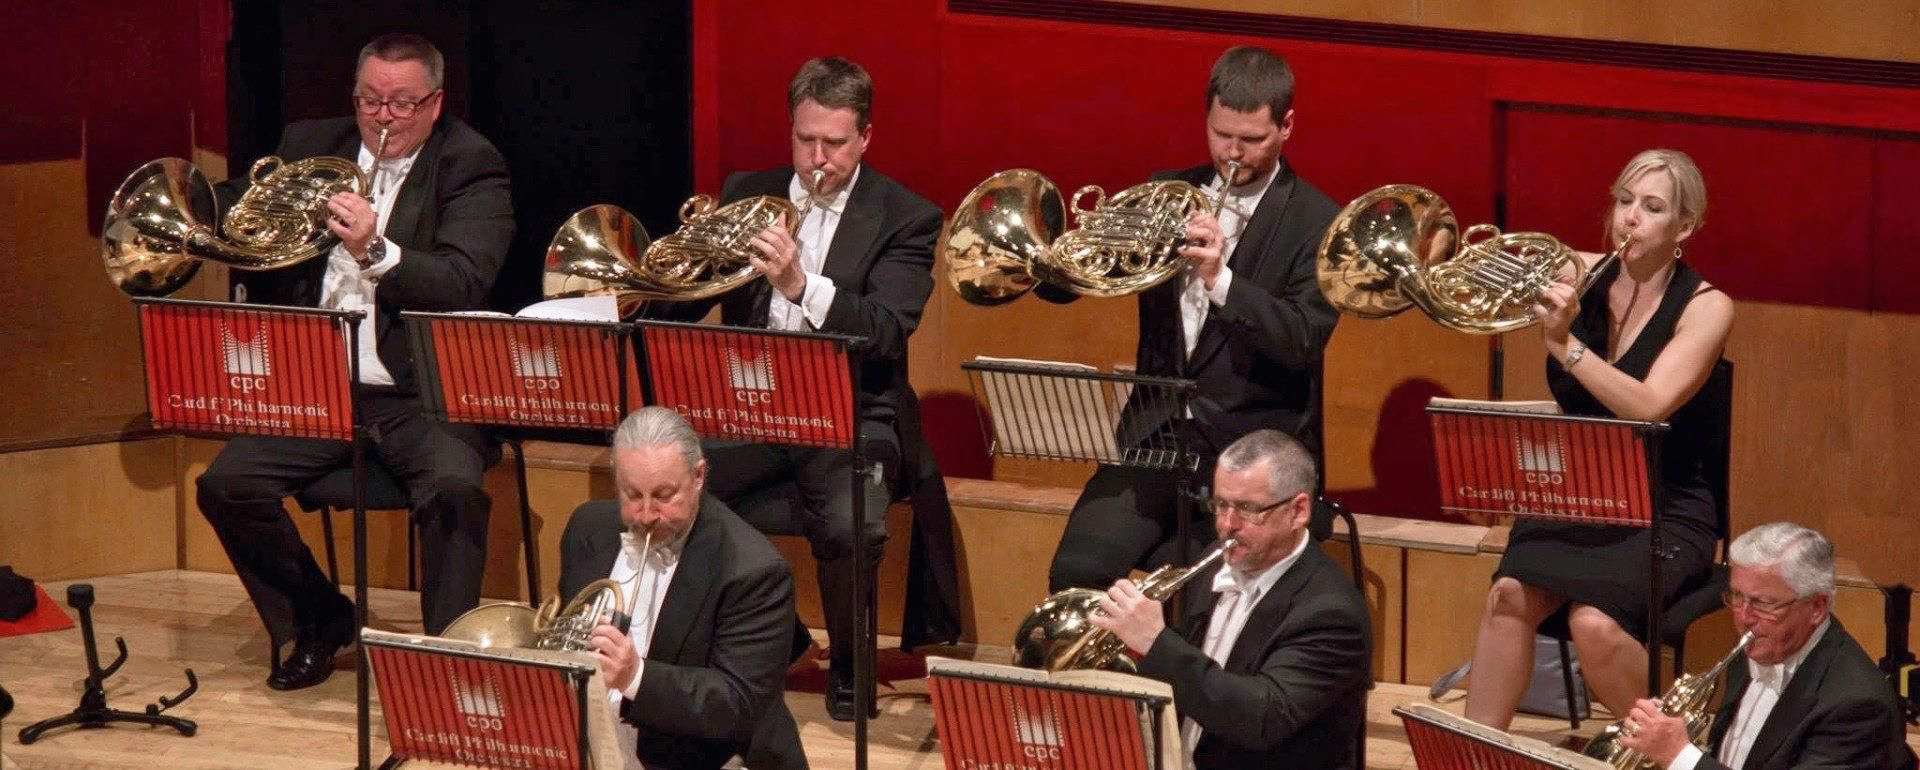 French horn section in action at St. David's Hall